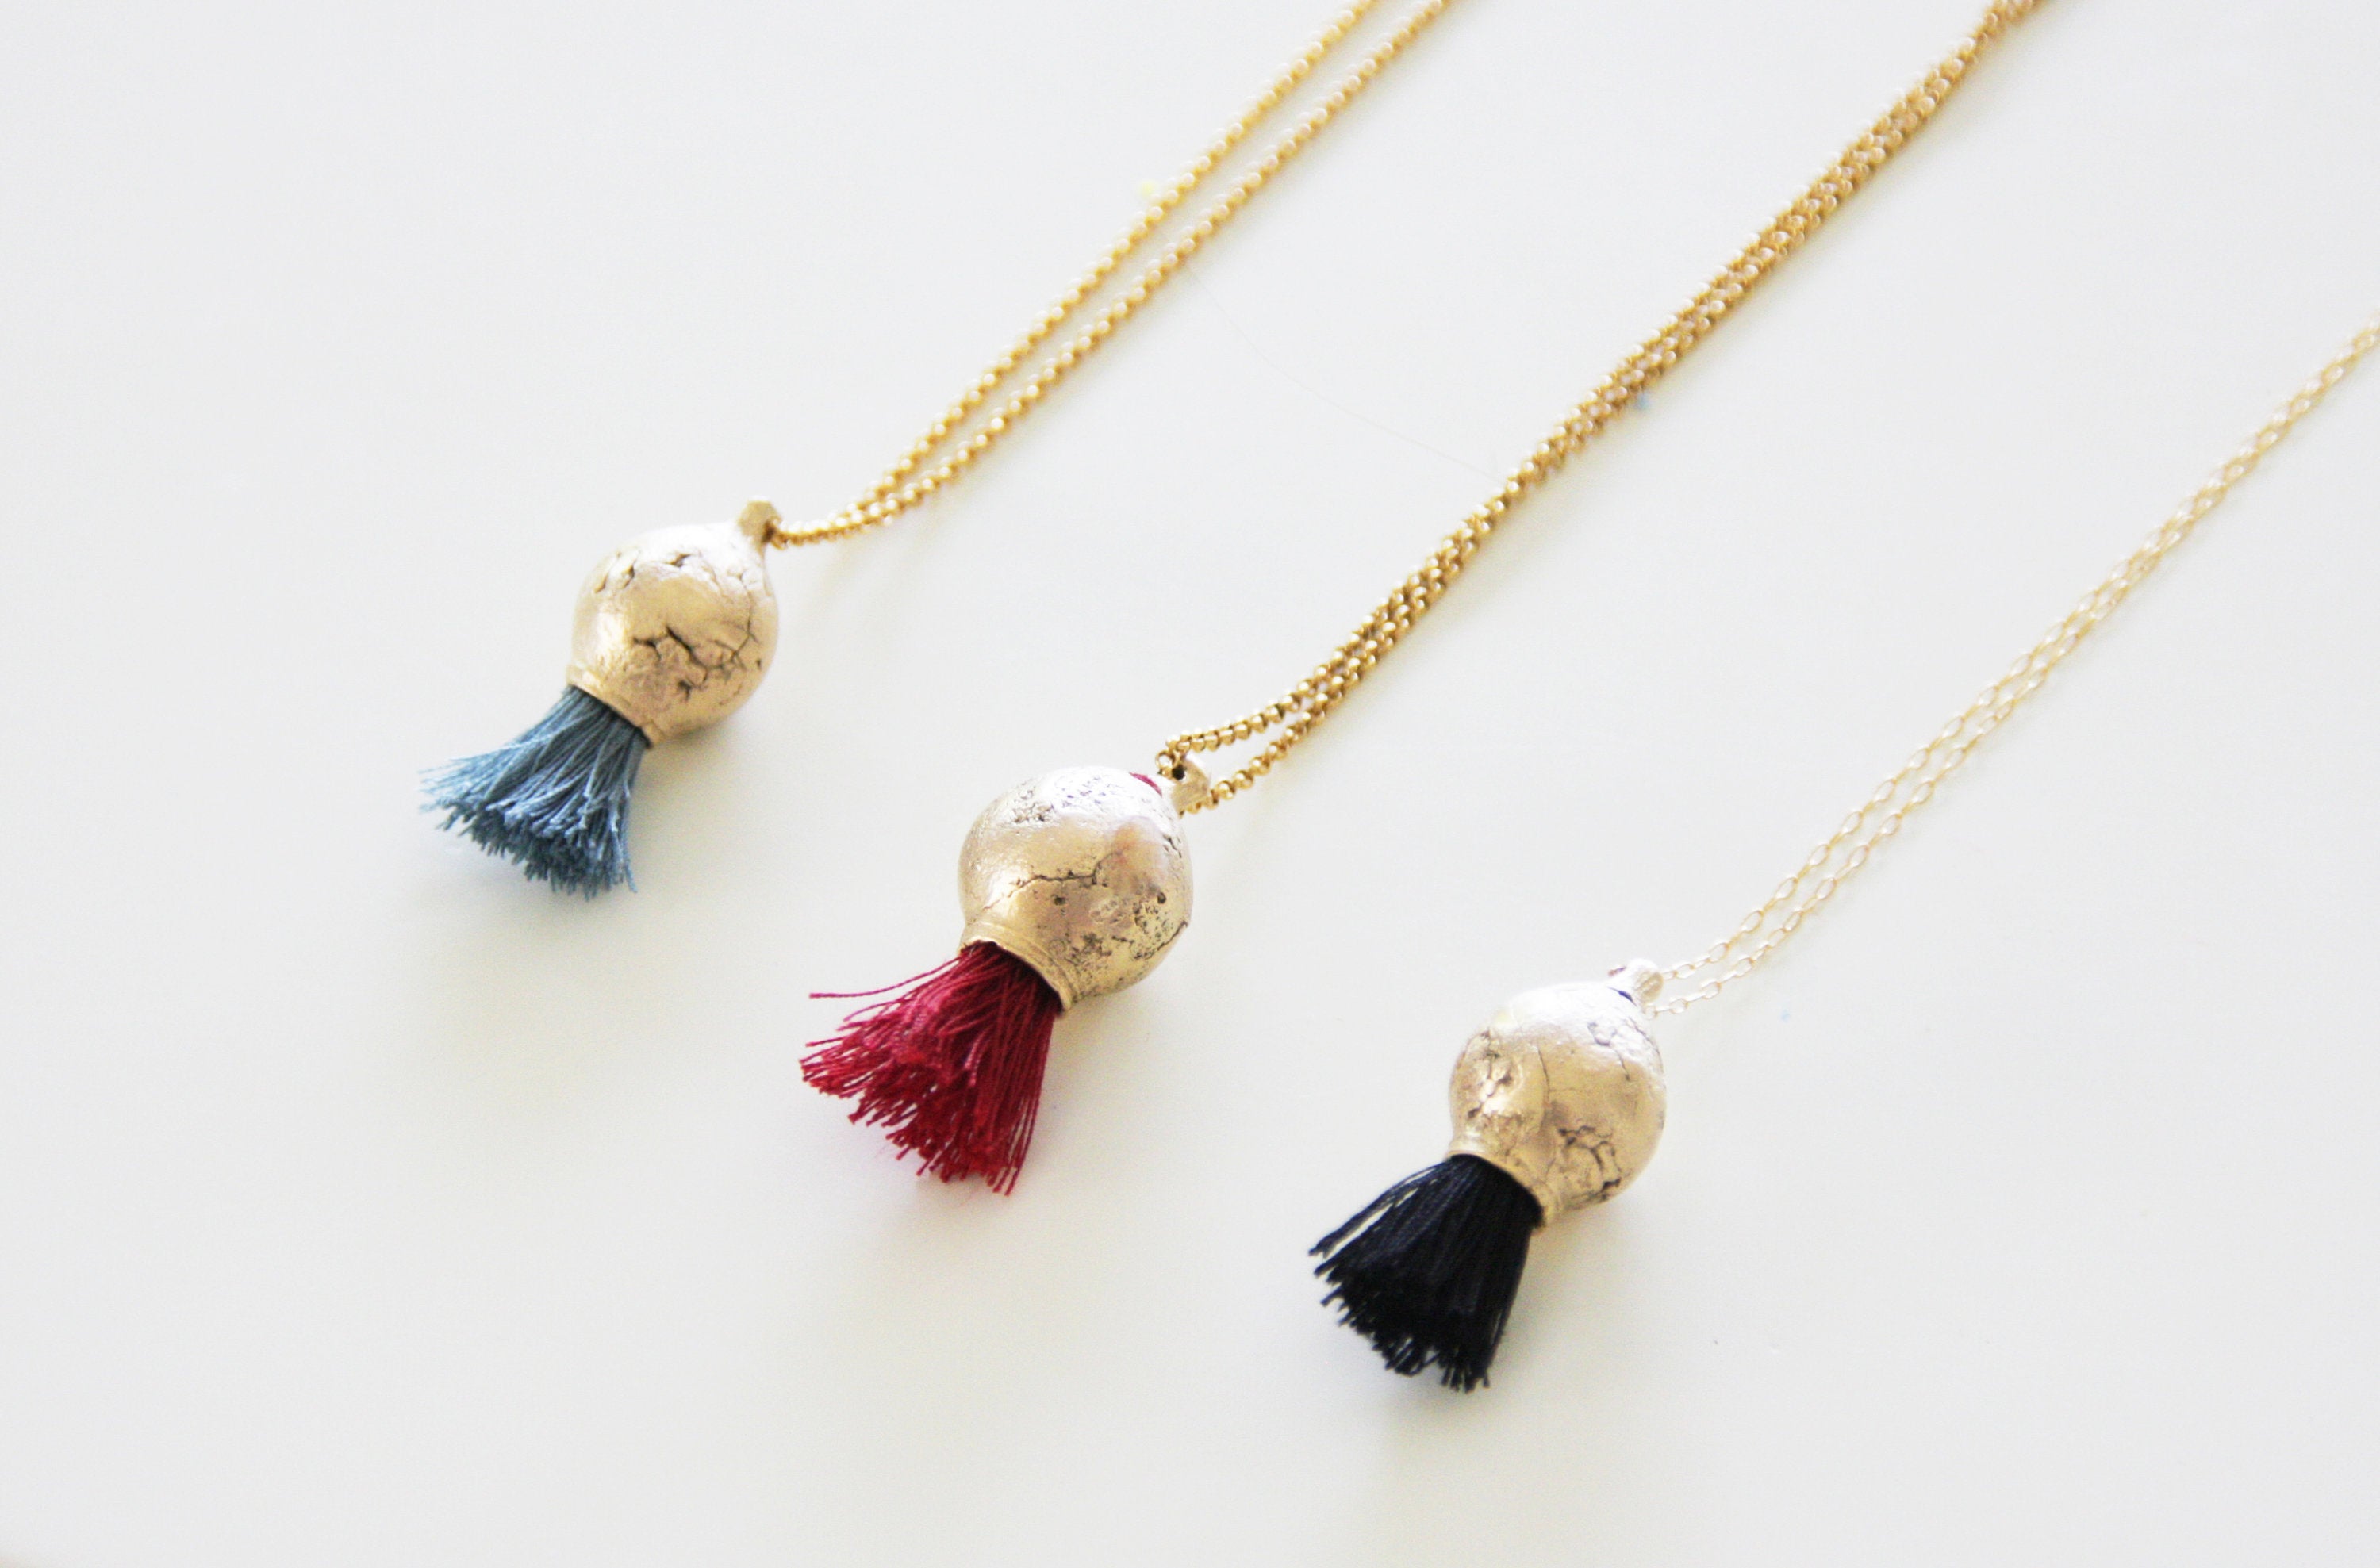 Inspired By nature pendant with Black tassel - hs